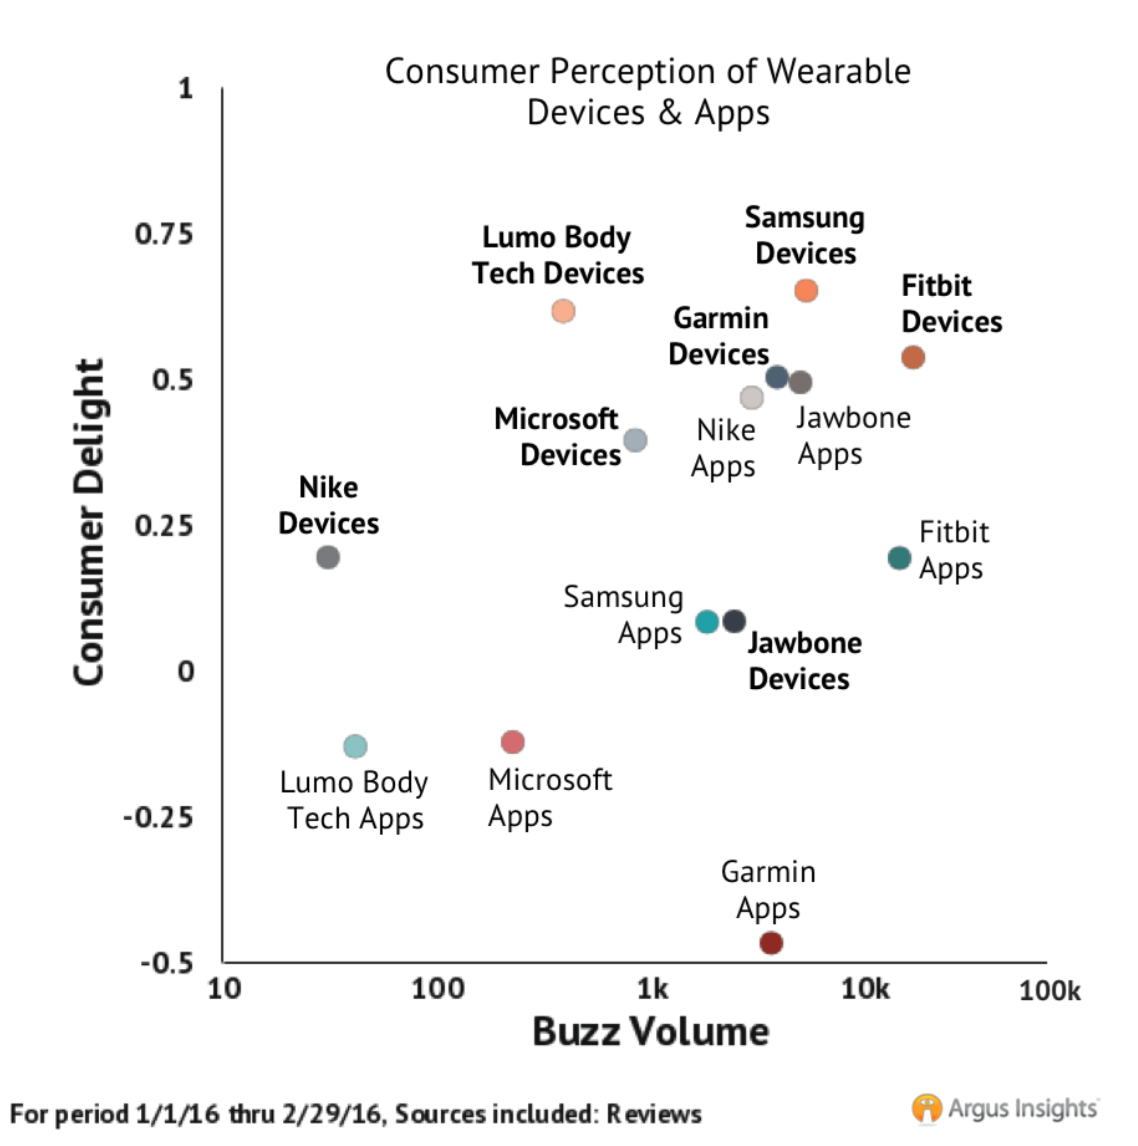 Consumer Perception of Wearable Devices & Apps